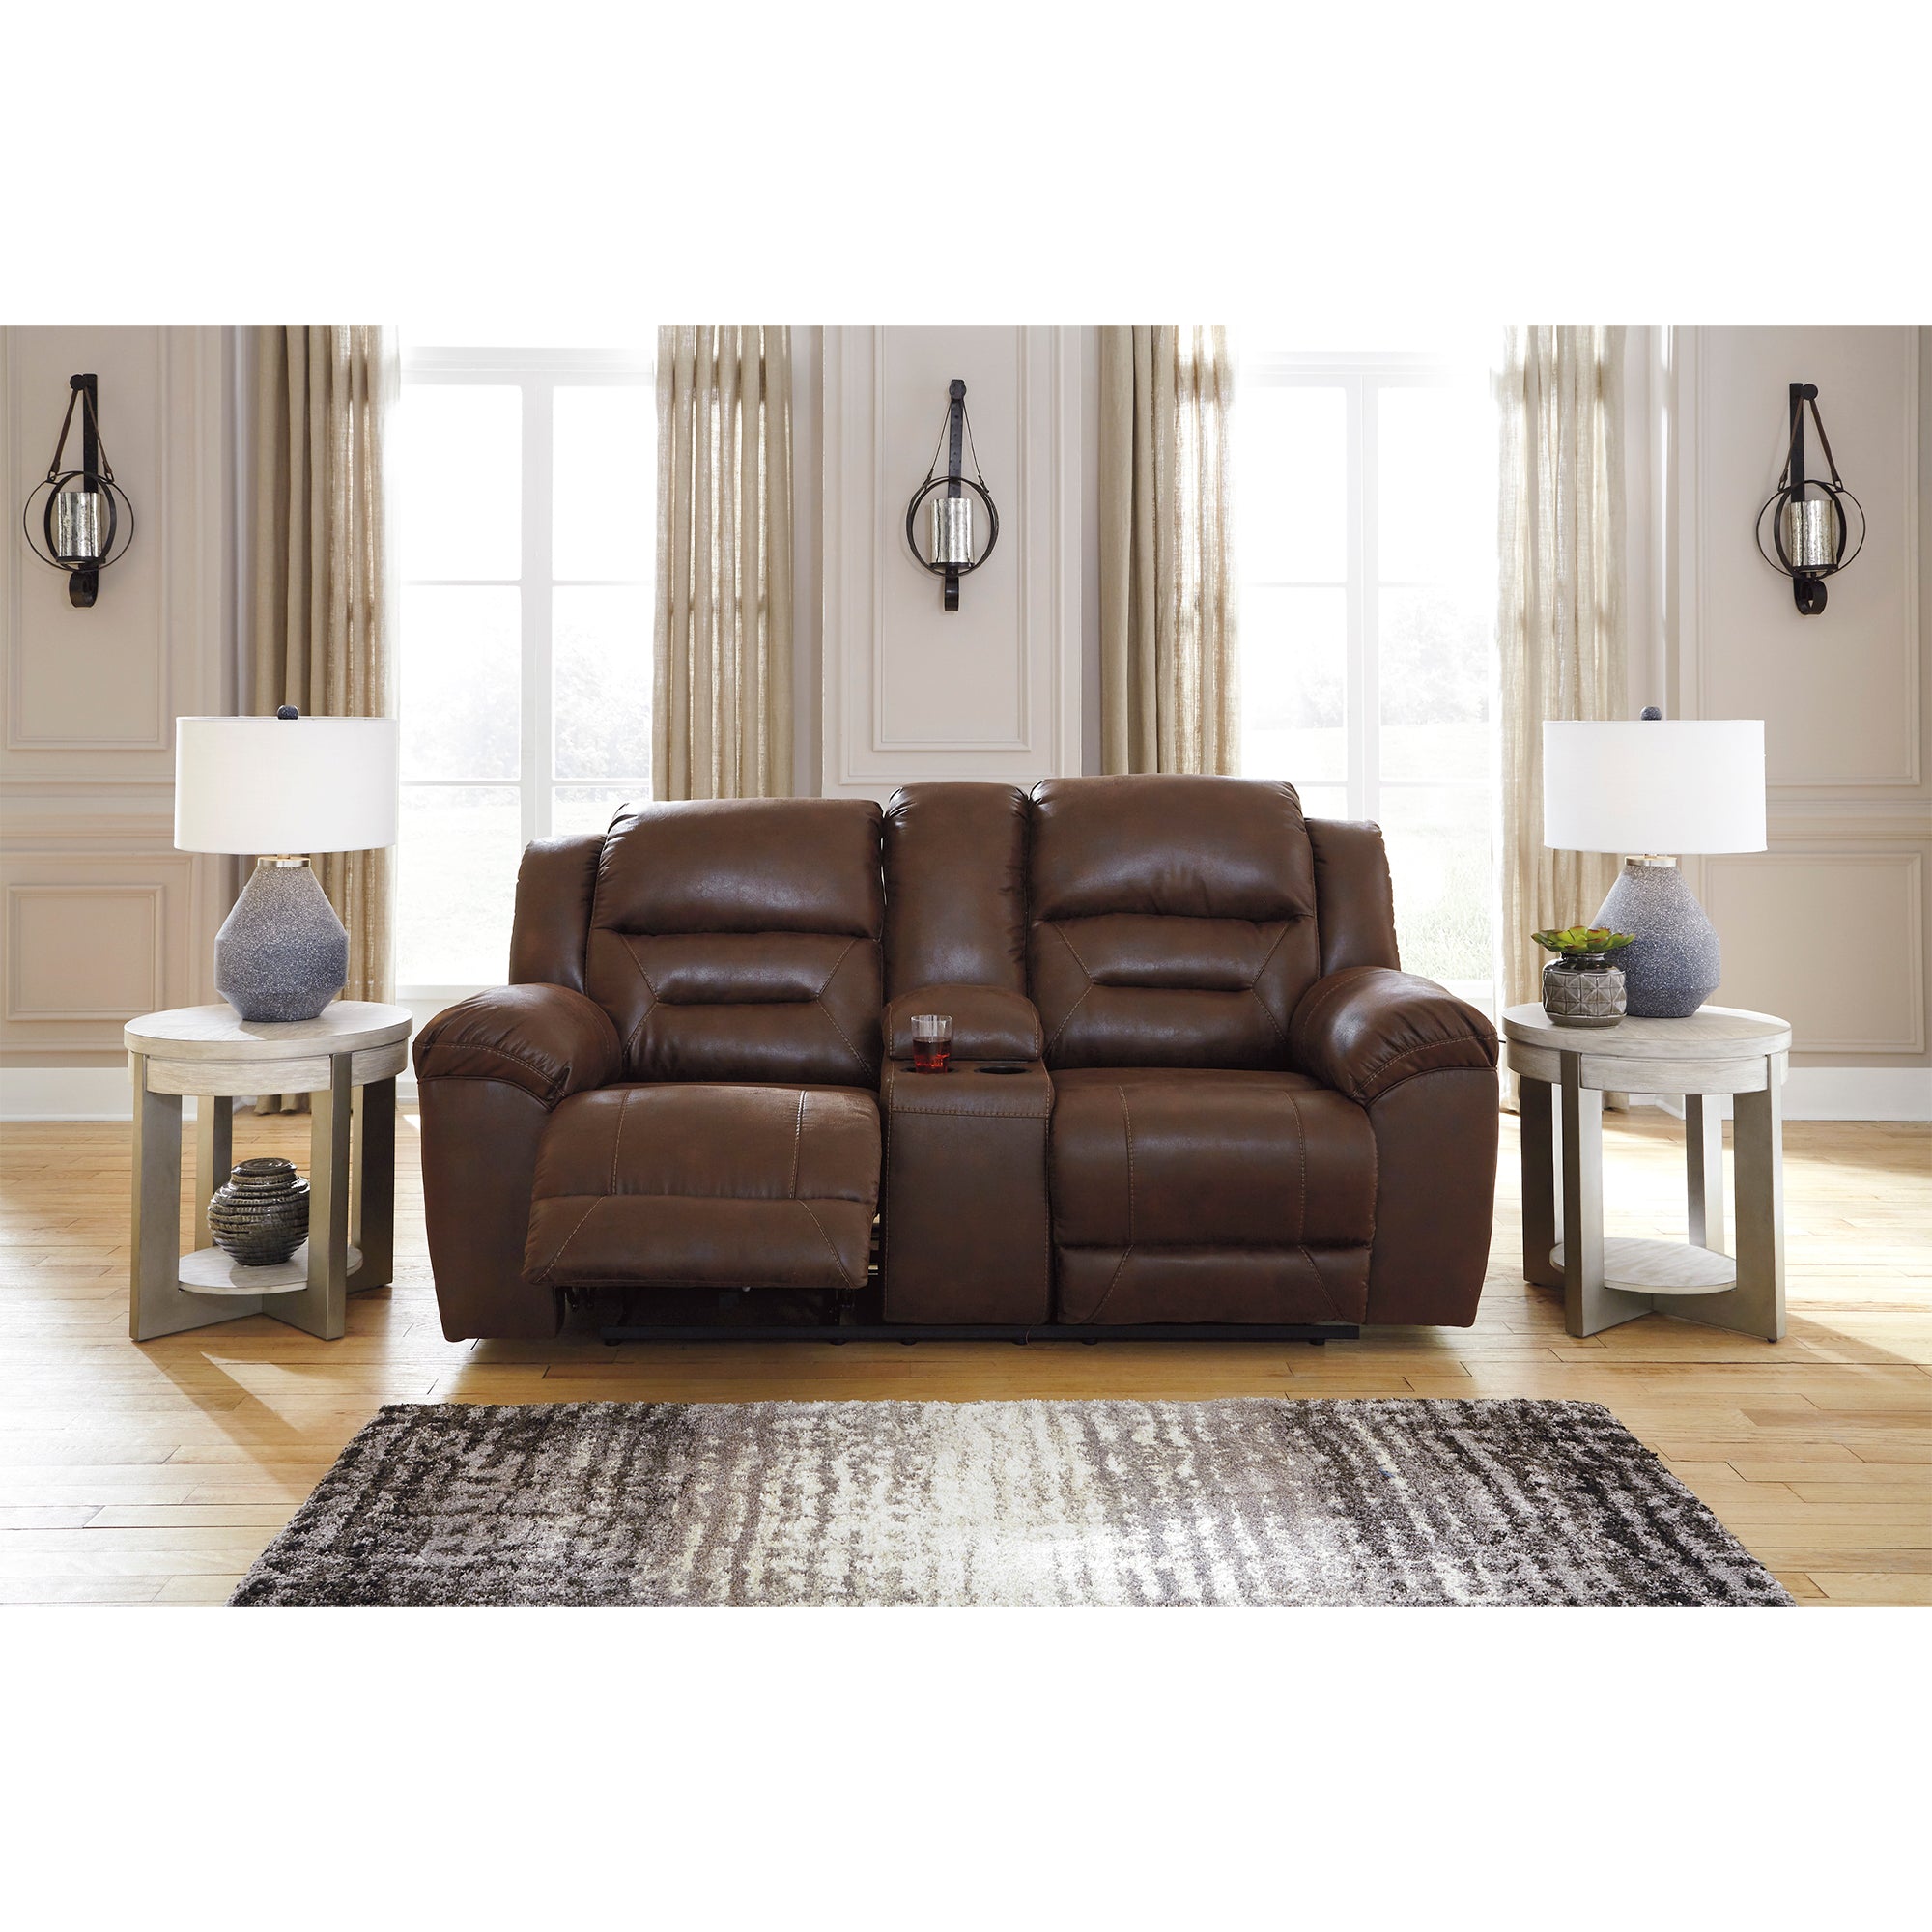 Stoneland Manual Reclining Loveseat with Console